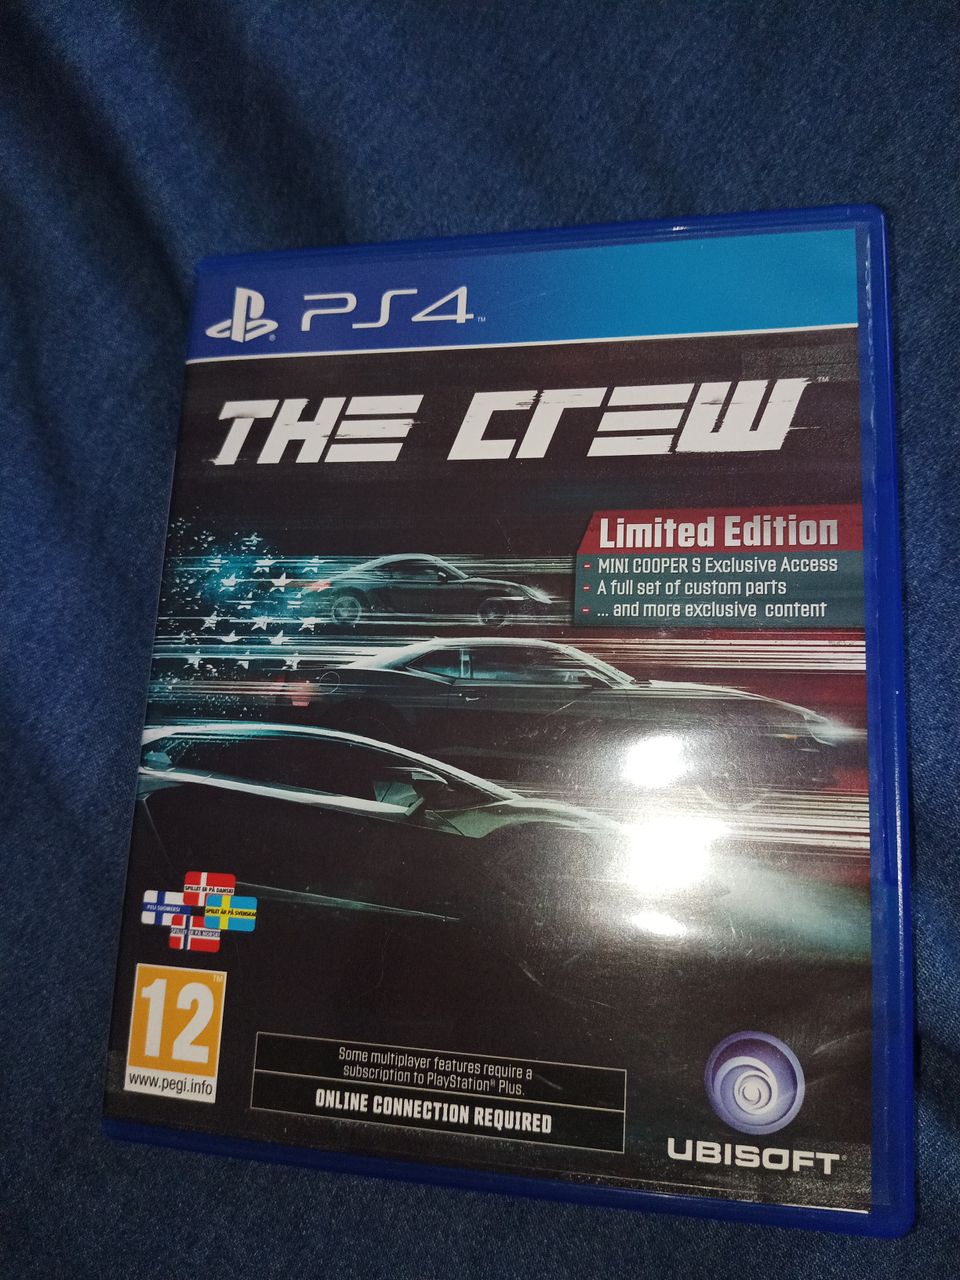 The crew LIMITED EDITION!